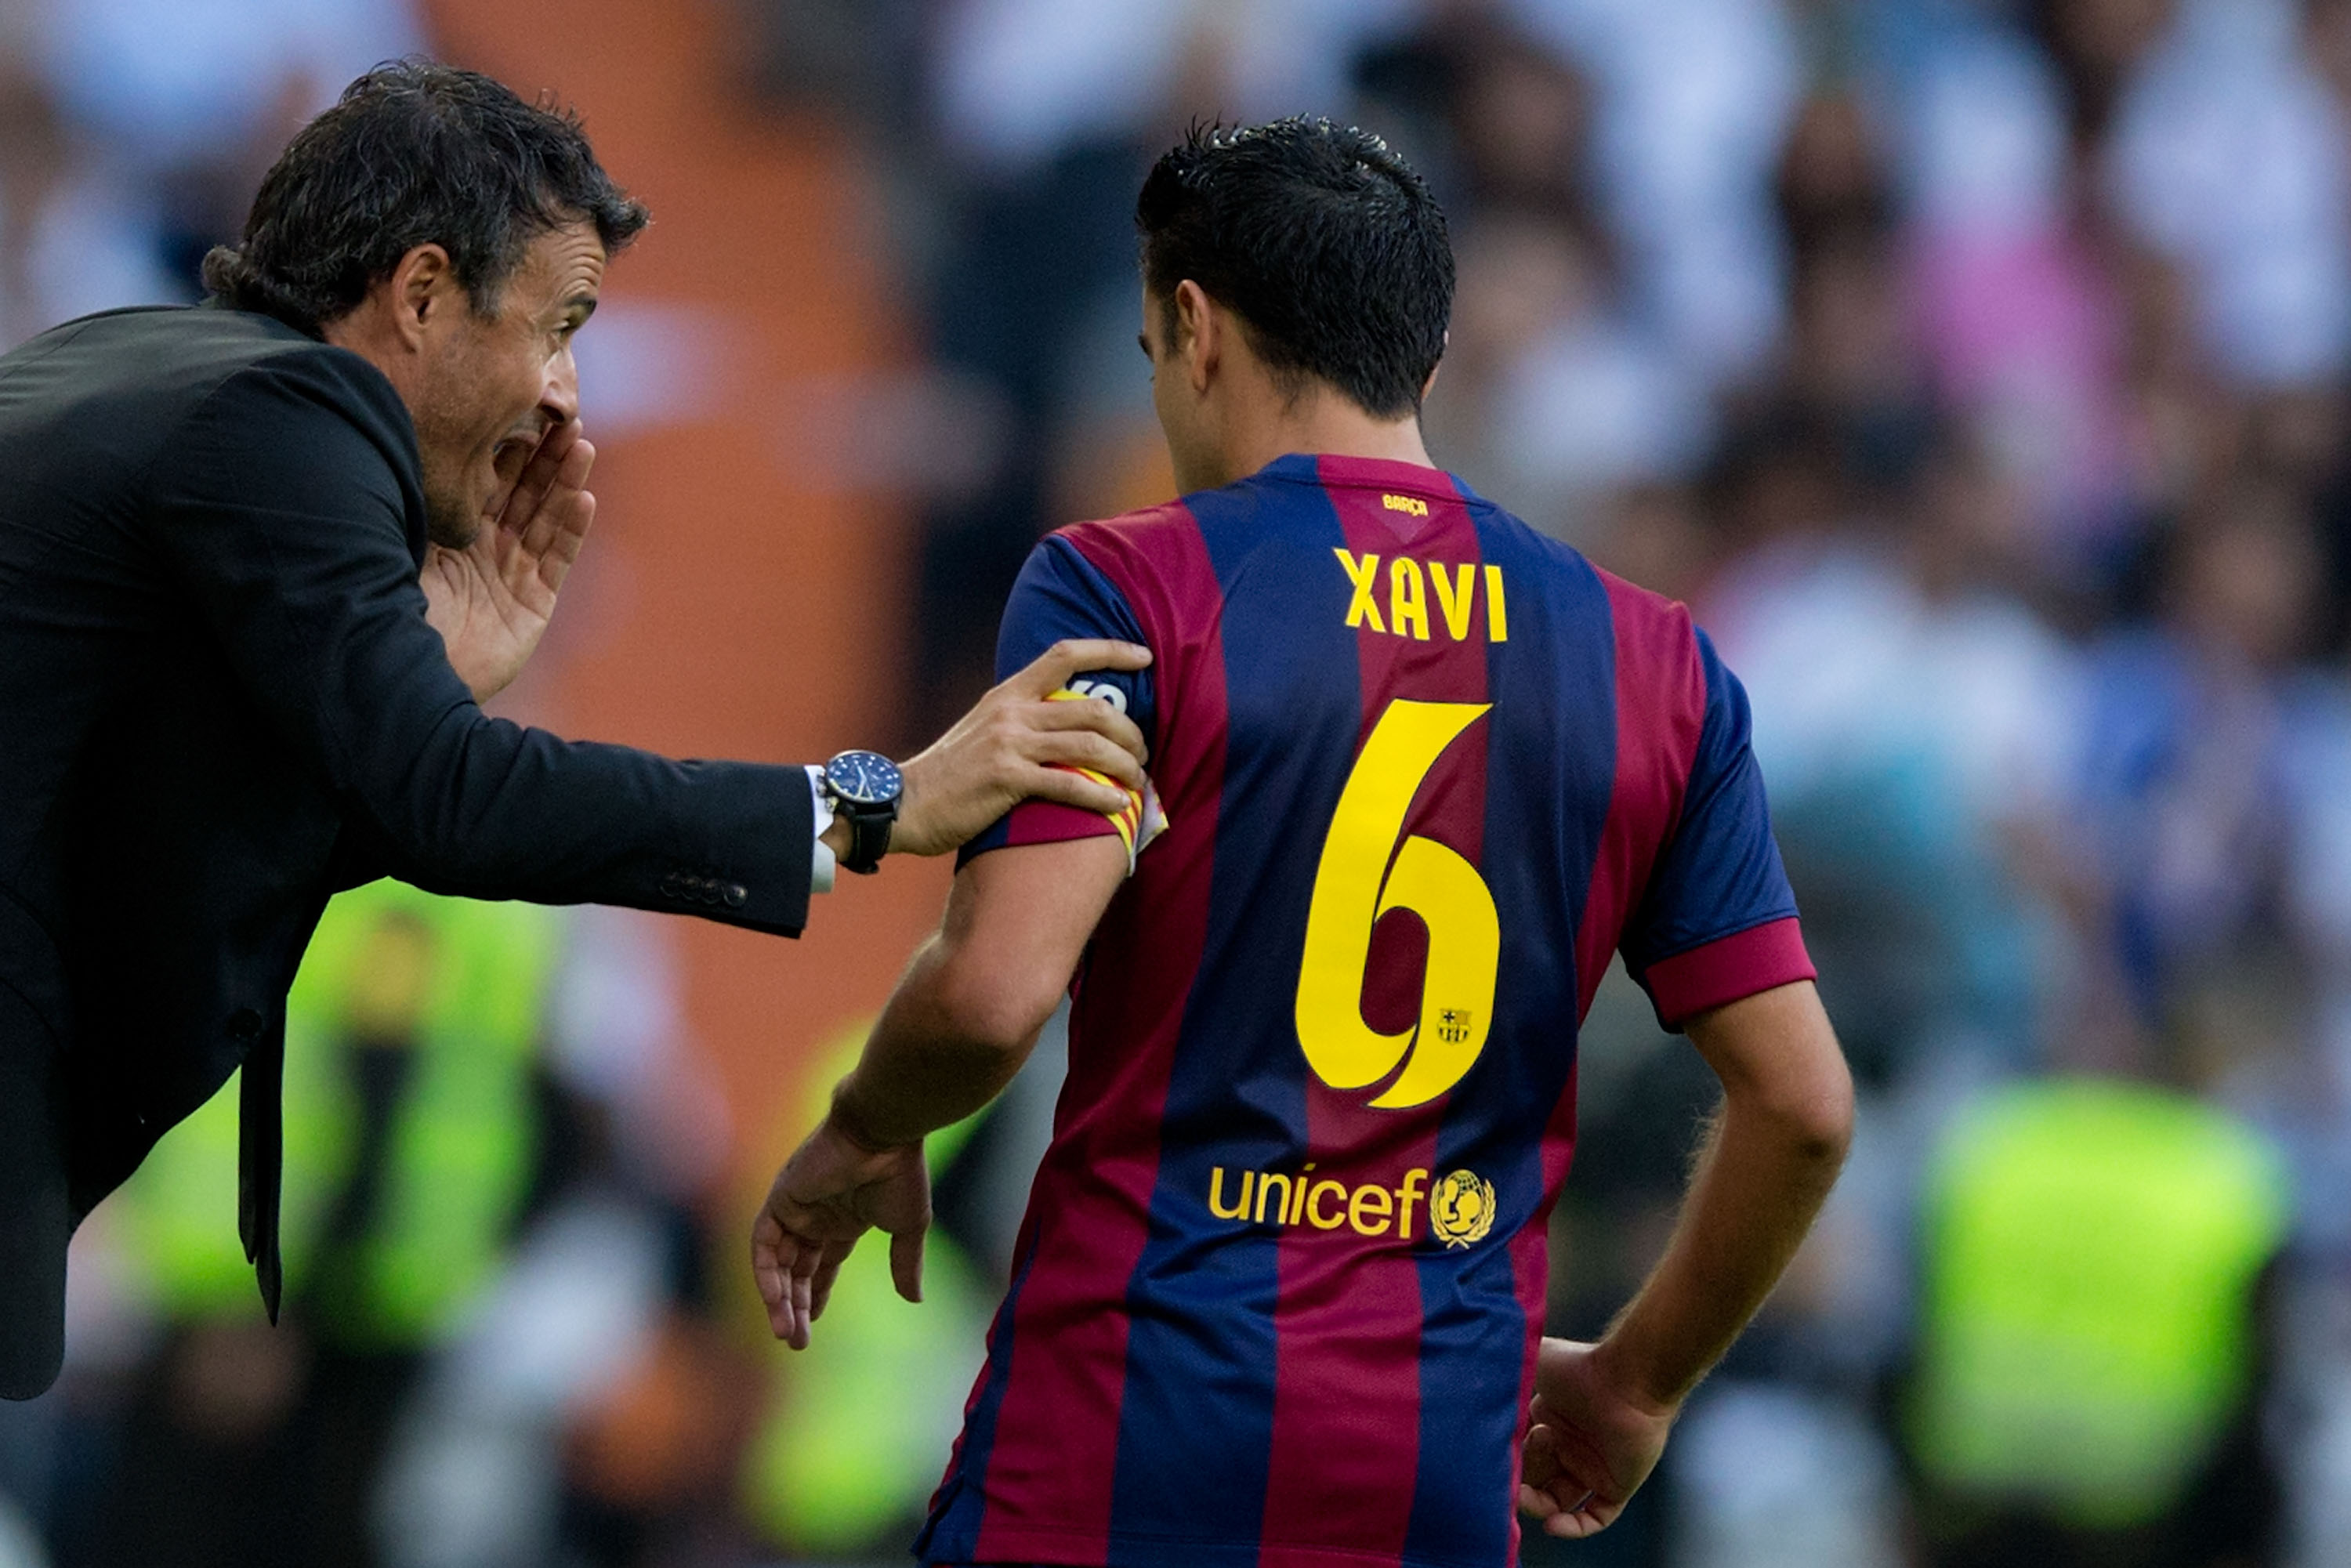 Could Luis Enrique be tempted by Barcelona's overtures?